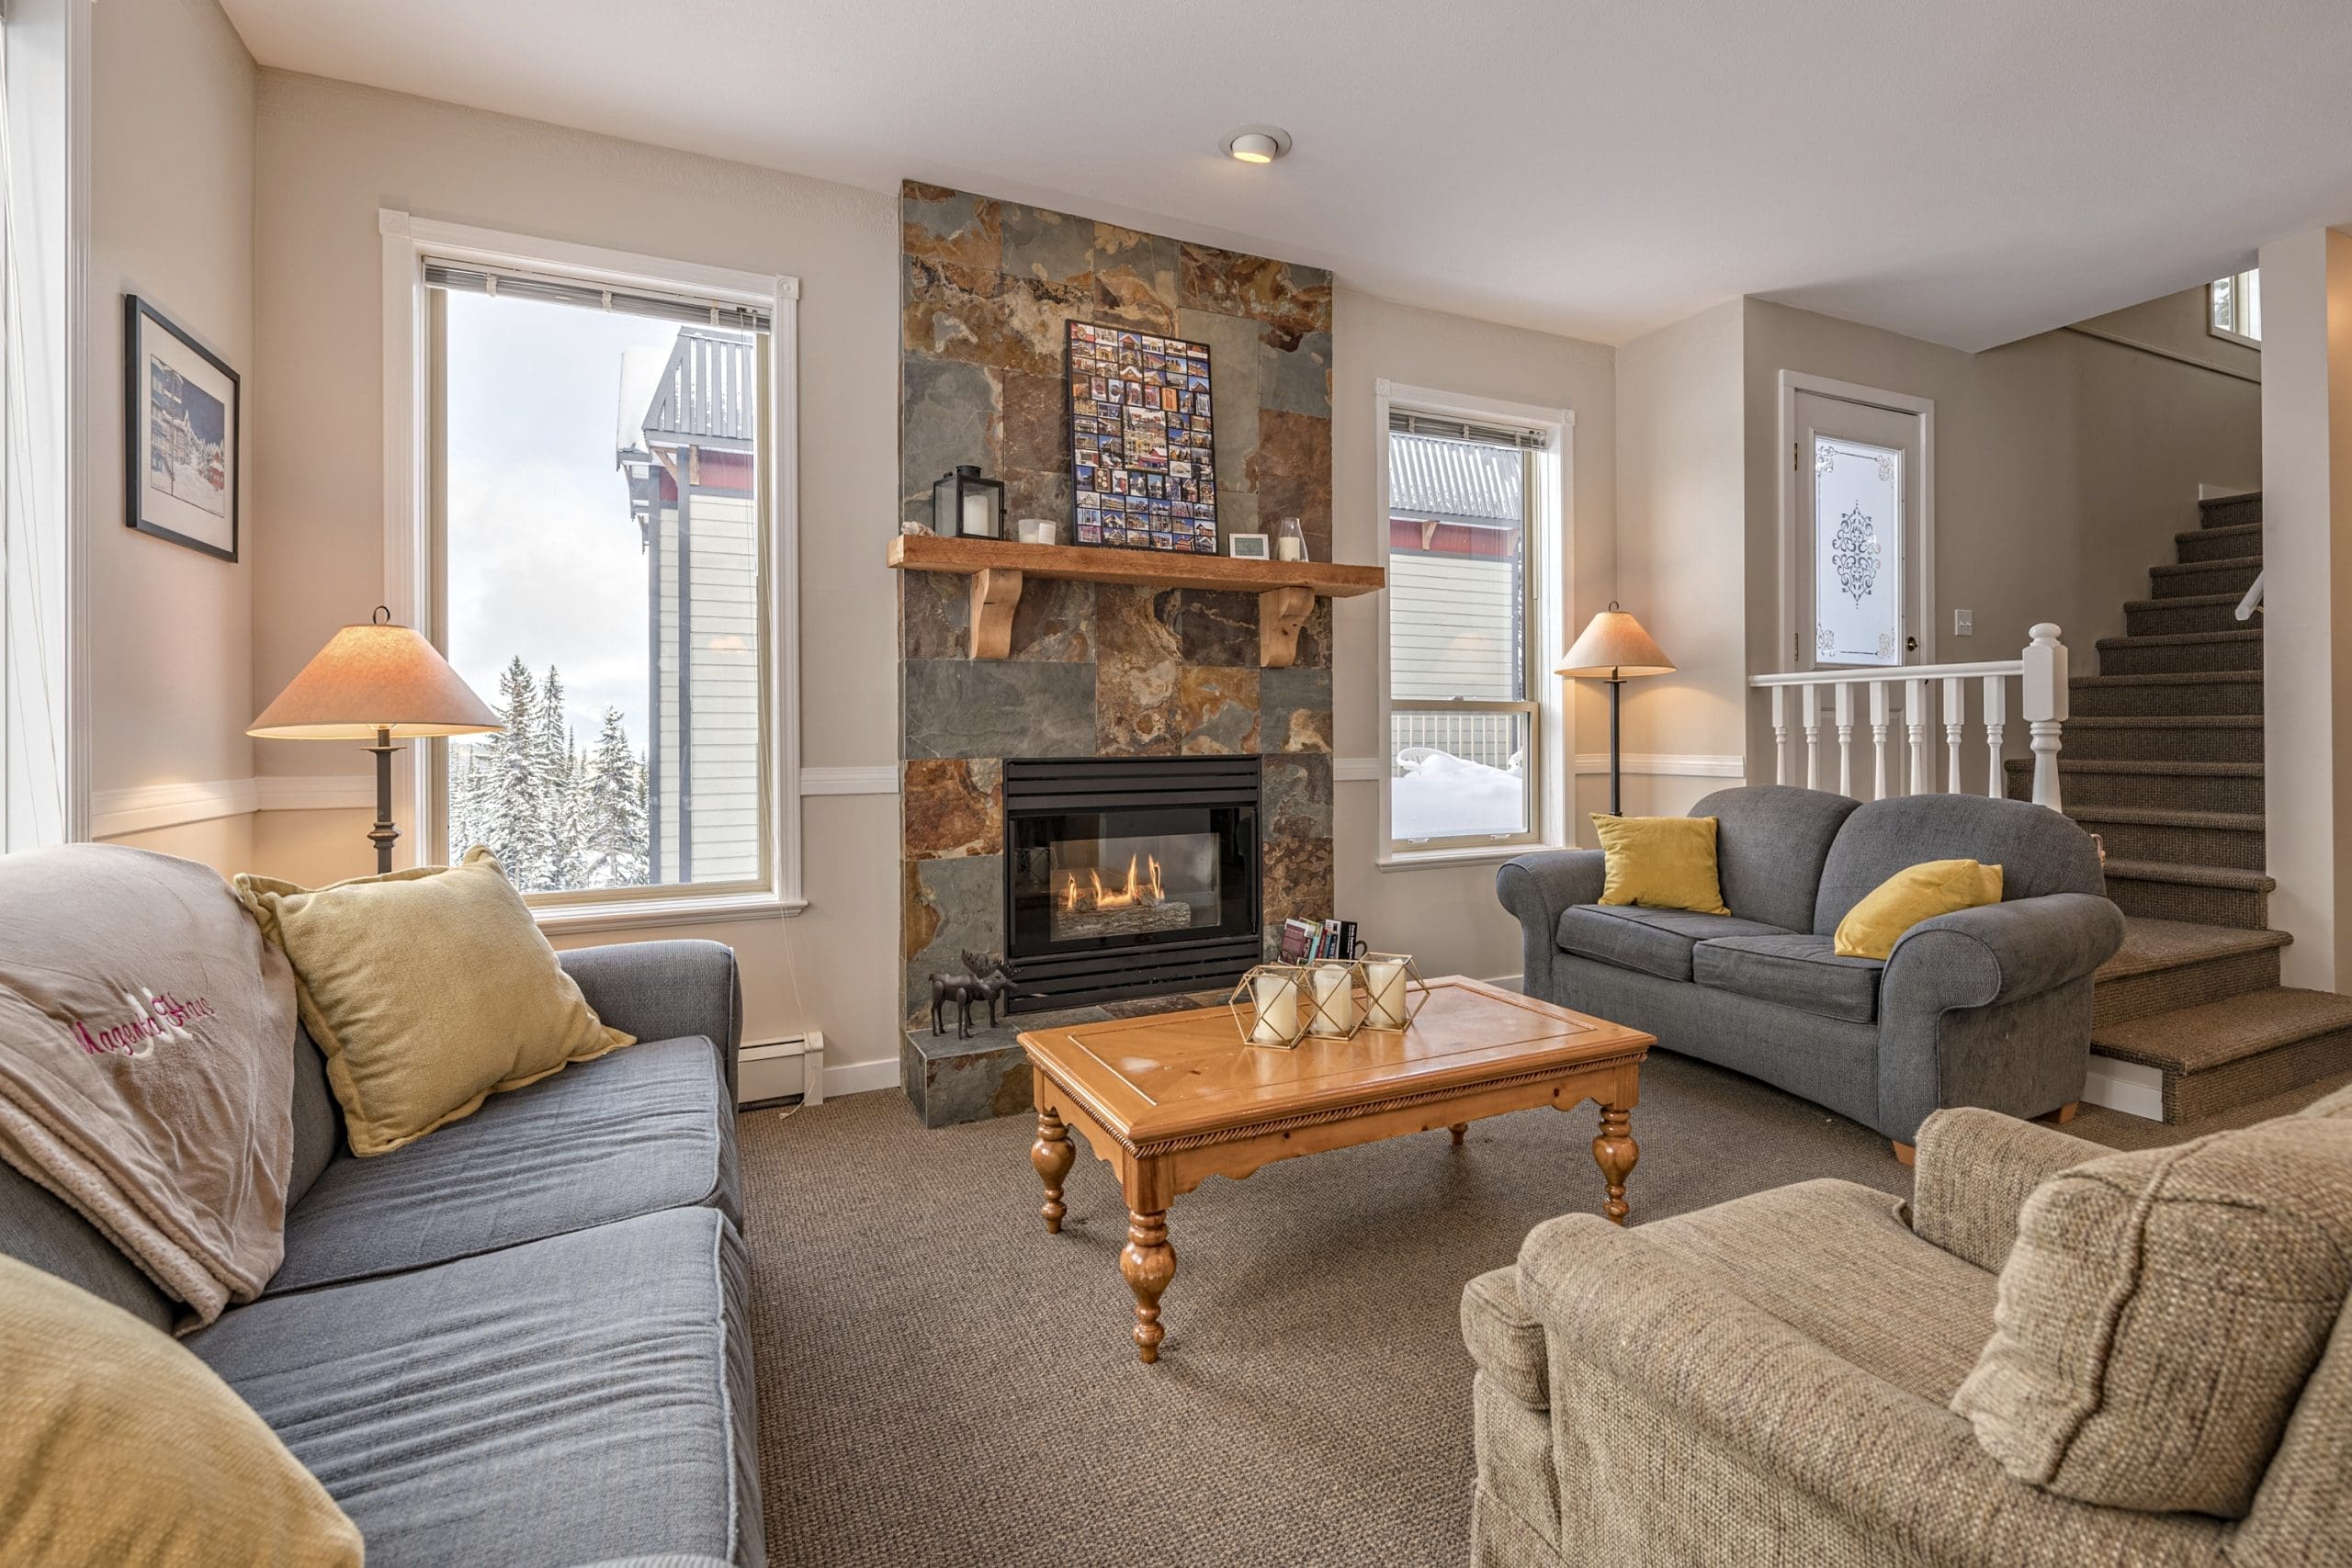 This Upper level living room is newly renovated, bright open windows, gas fireplace, large outdoor deck with brand new BBQ. Featuring a private hot tub, laundry, and enough space for everyone to spread out.